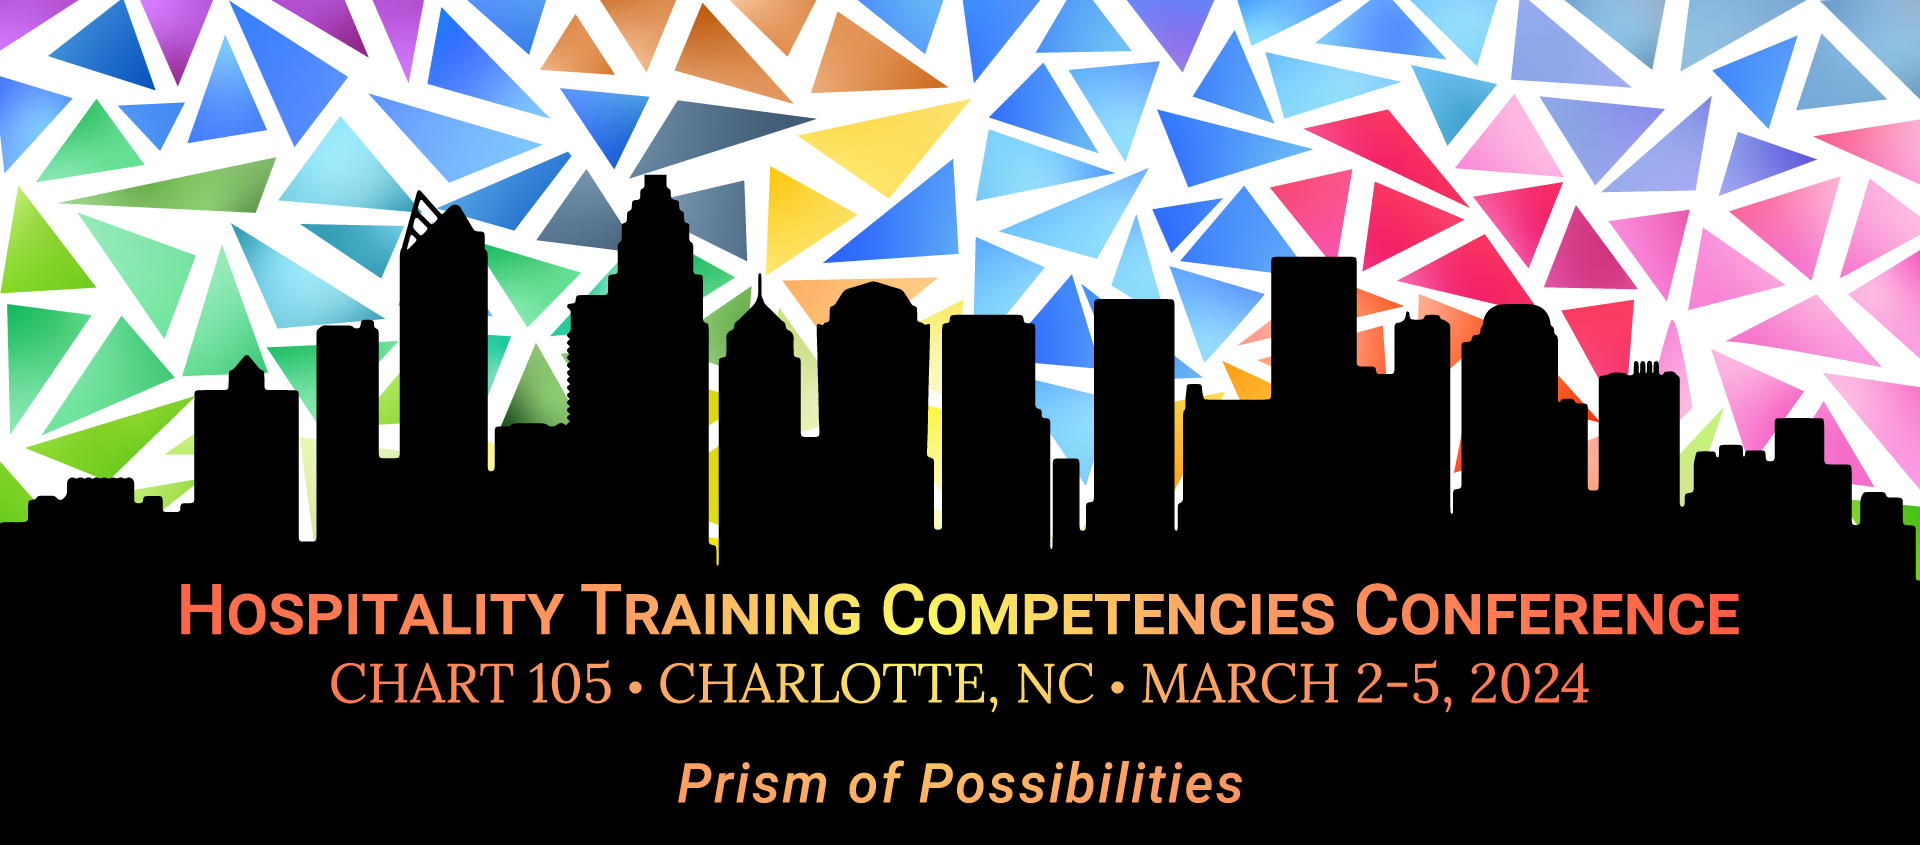 CHART 105 Charlotte Hospitality Training Competencies Conference | March 2-5, 2024 | The Westin